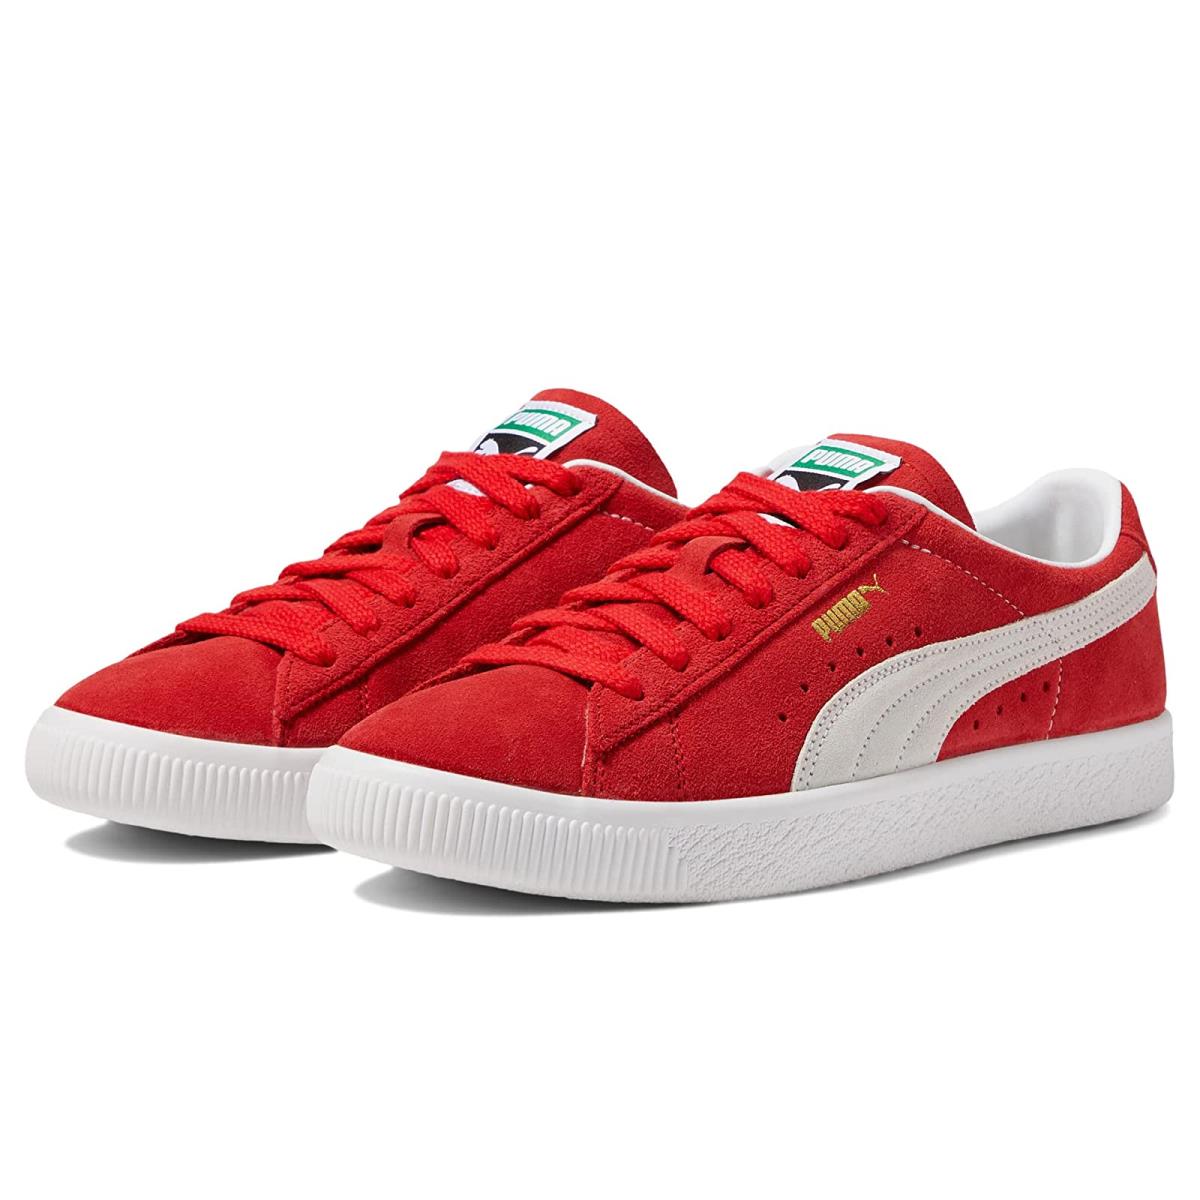 Unisex Sneakers Athletic Shoes Puma Suede Vintage High-Risk Red/Puma White